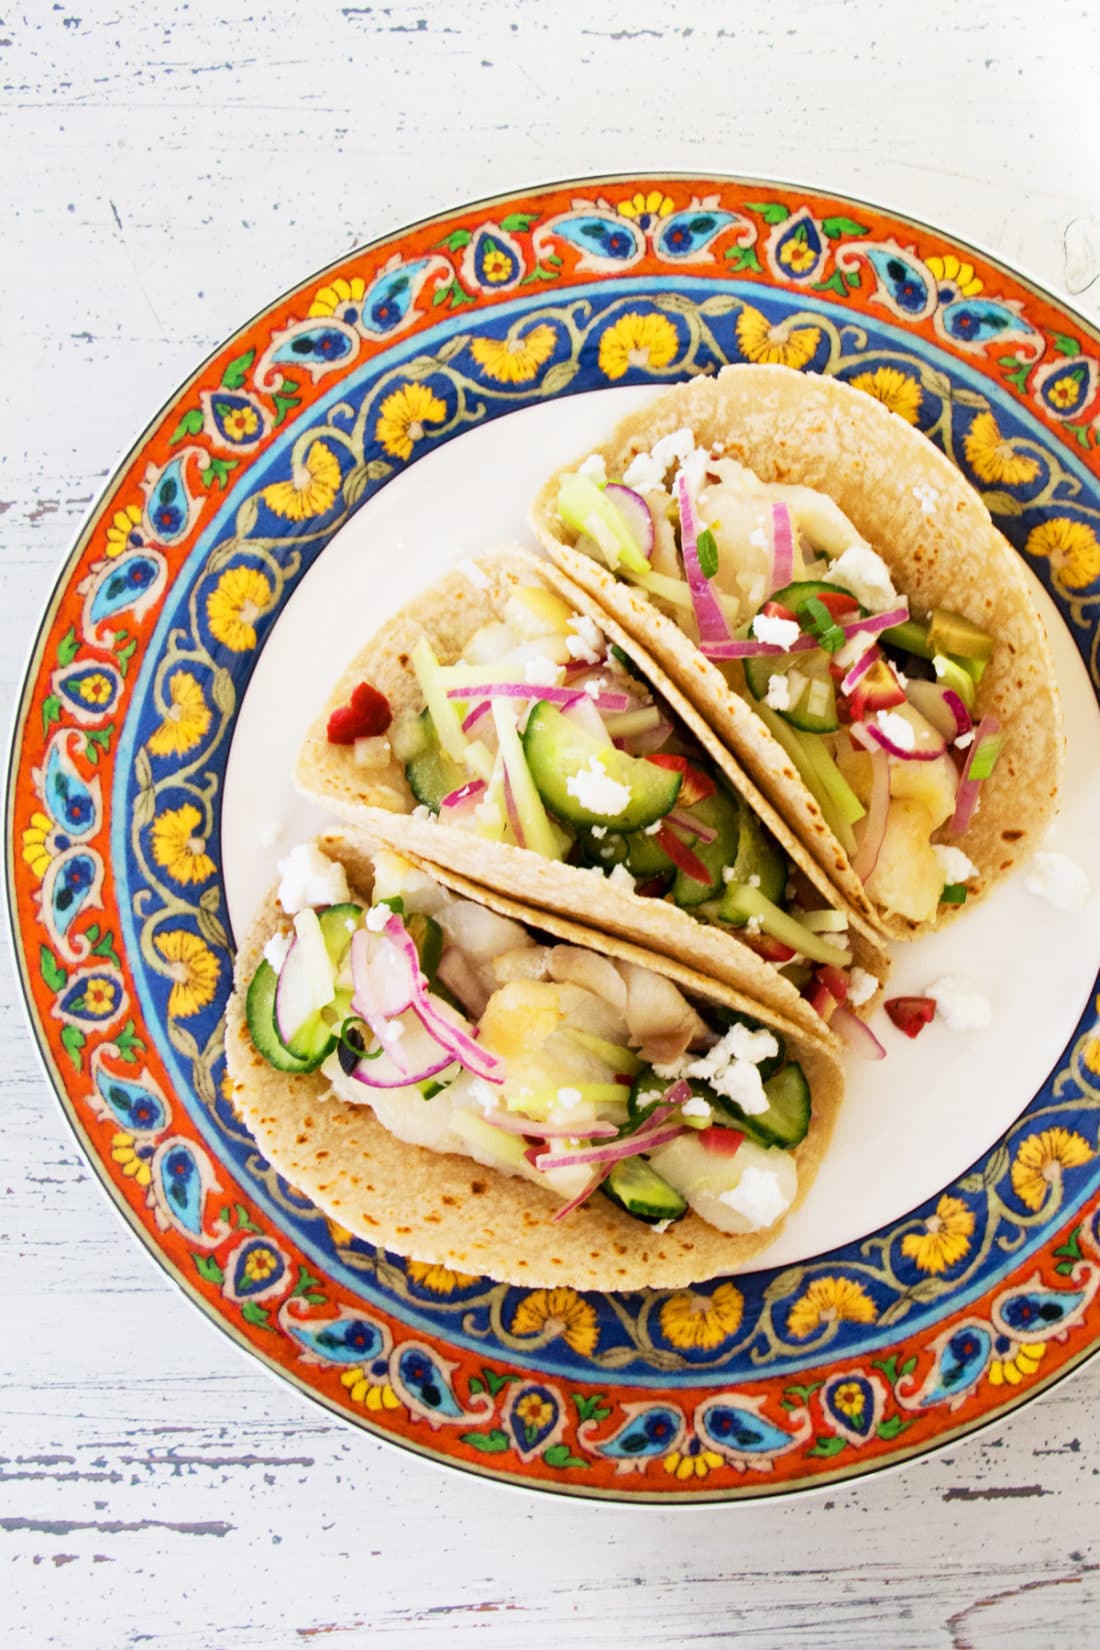 Colorful plate with three Flaky Fish Tacos with Vegetable Slaw.